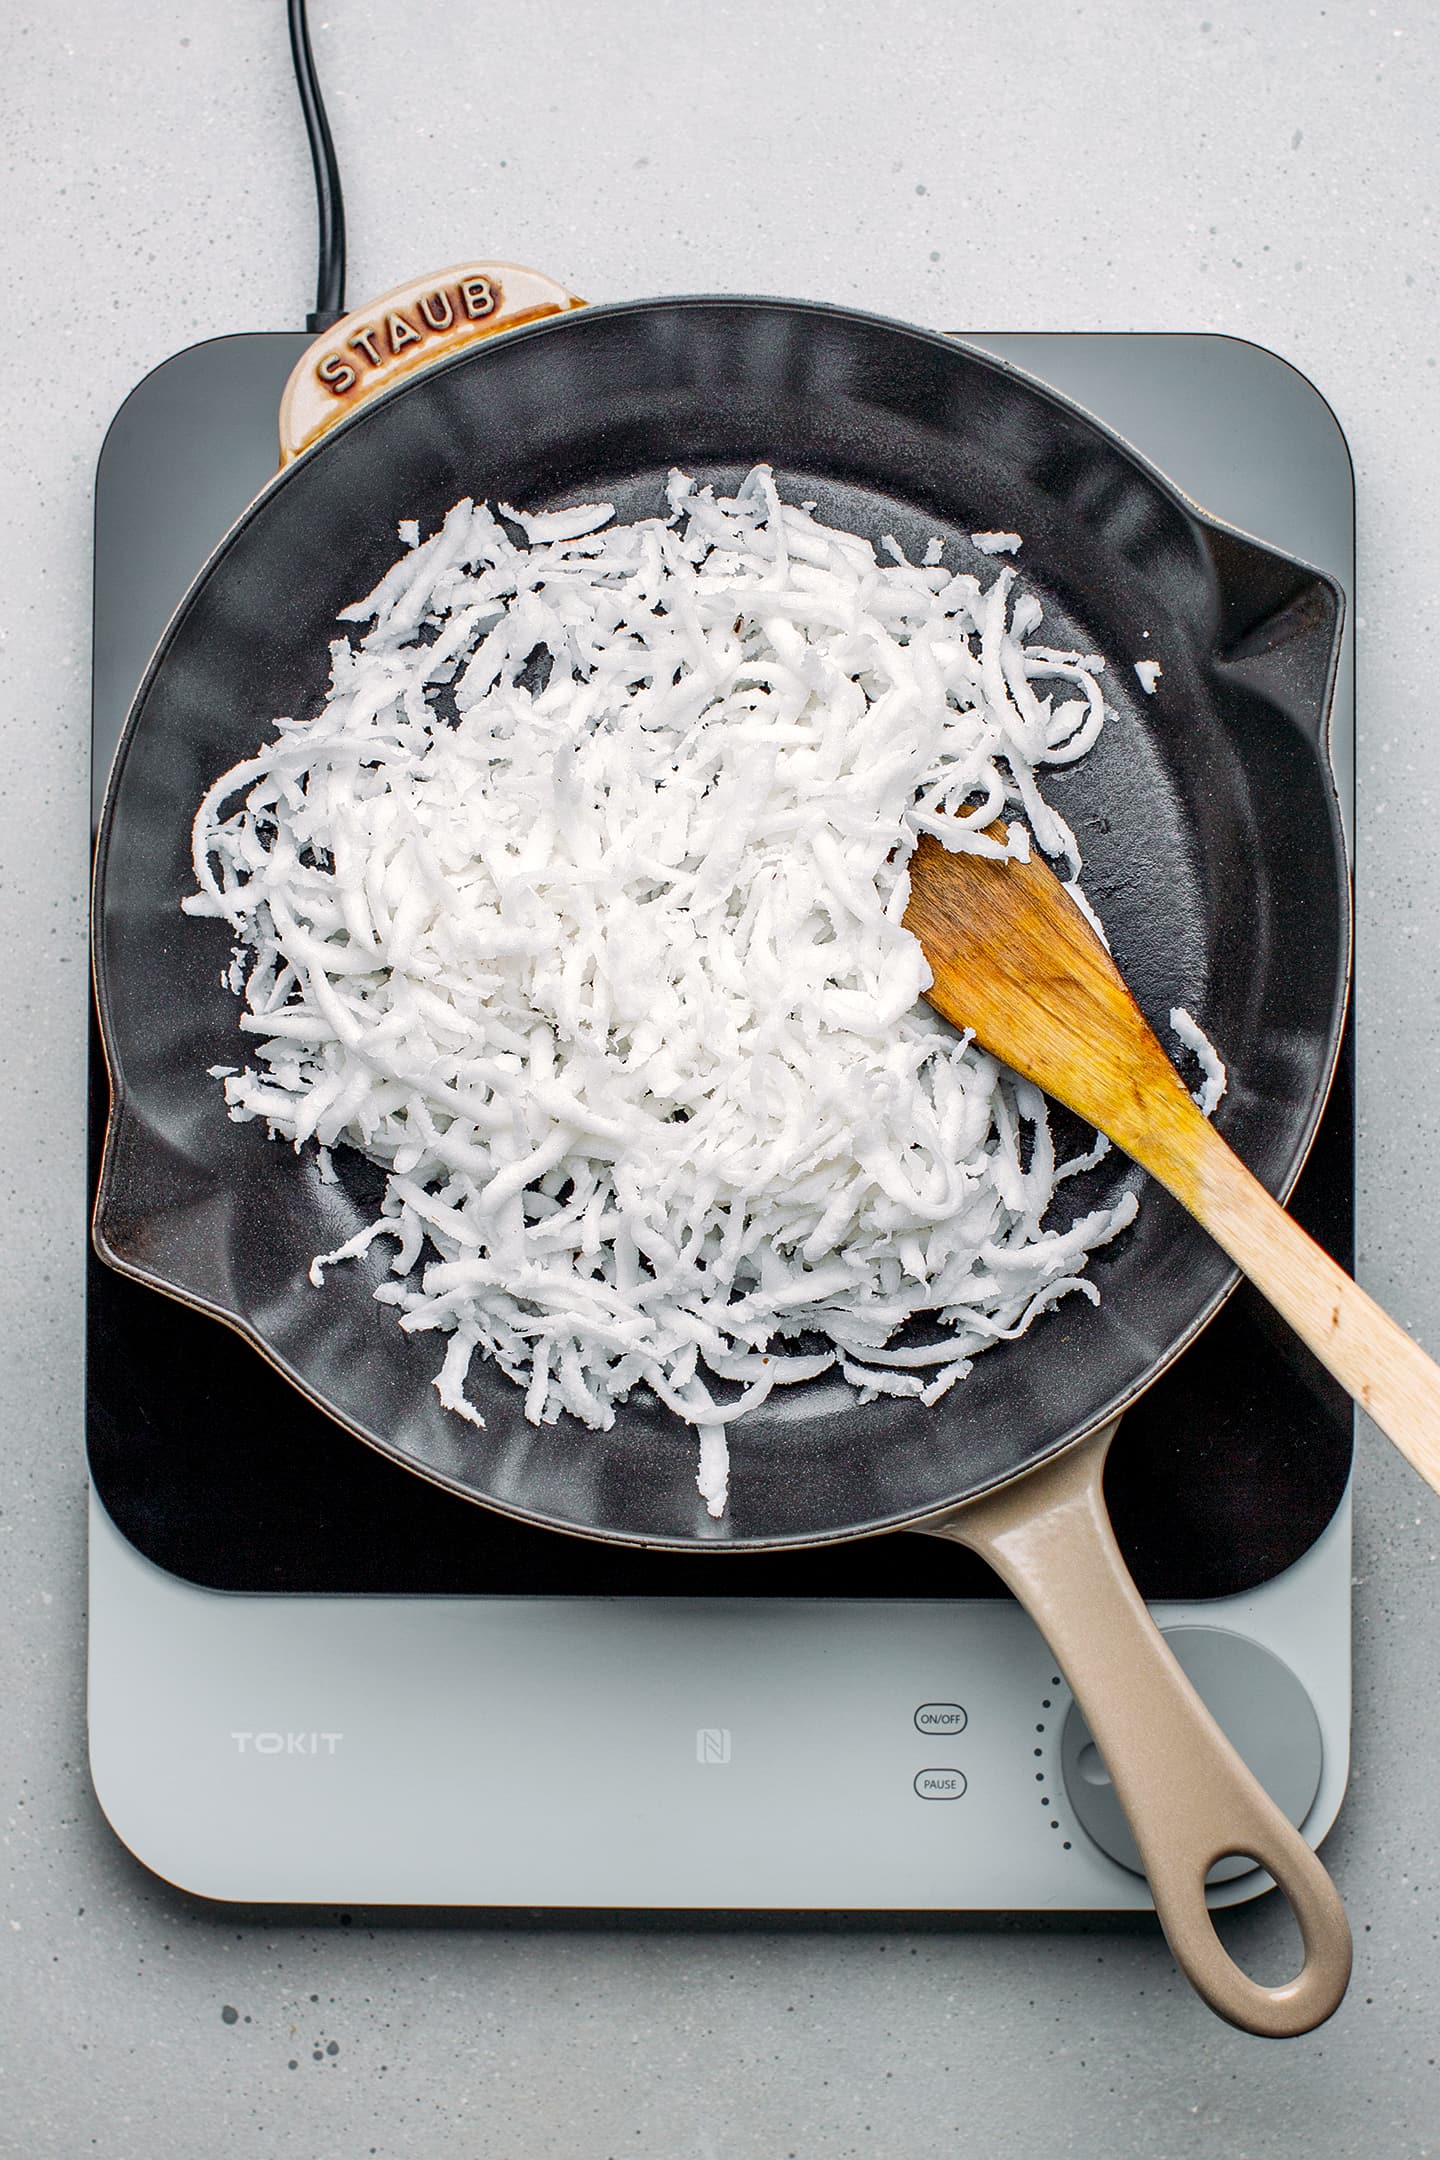 Shredded coconut in a pan.